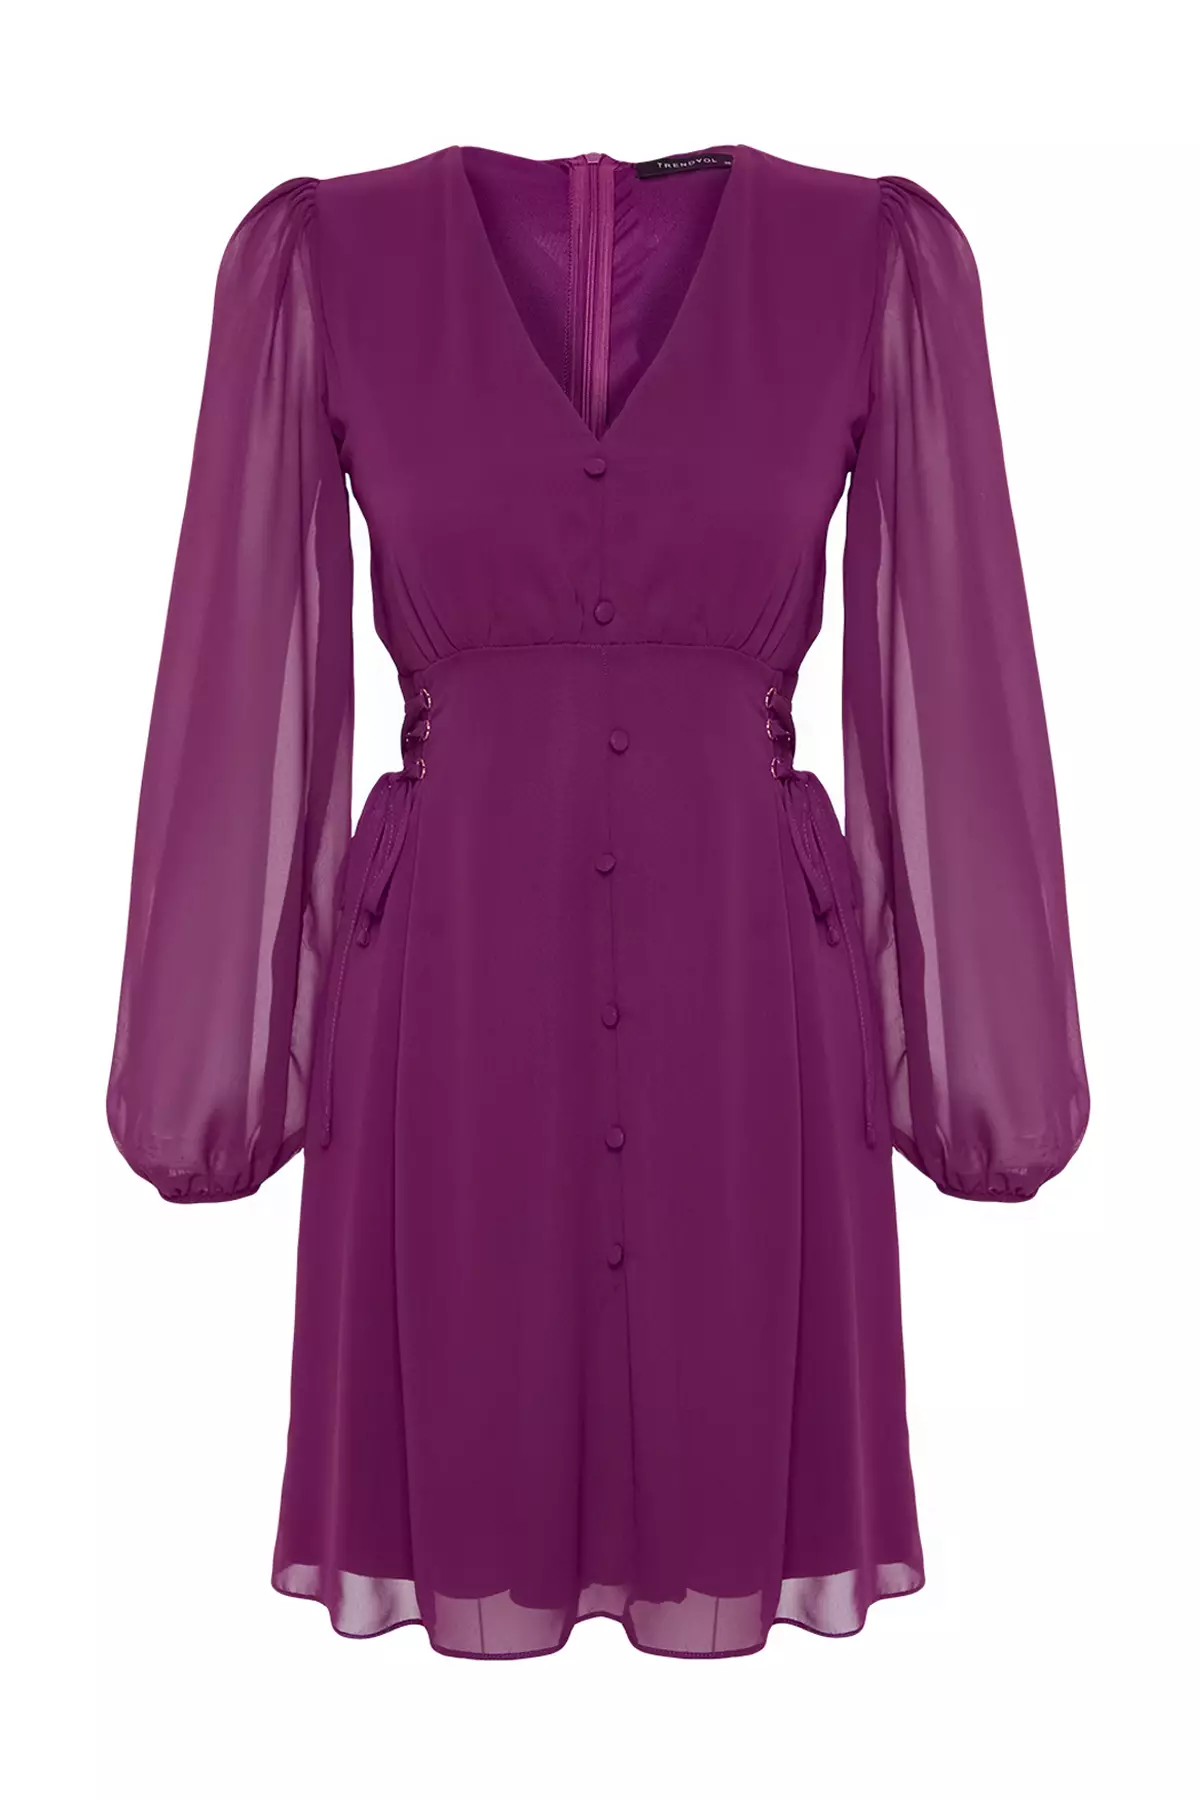 Buy Trendyol Purple Eyelet Detail and Buttons Lined Chiffon Woven Dress ...